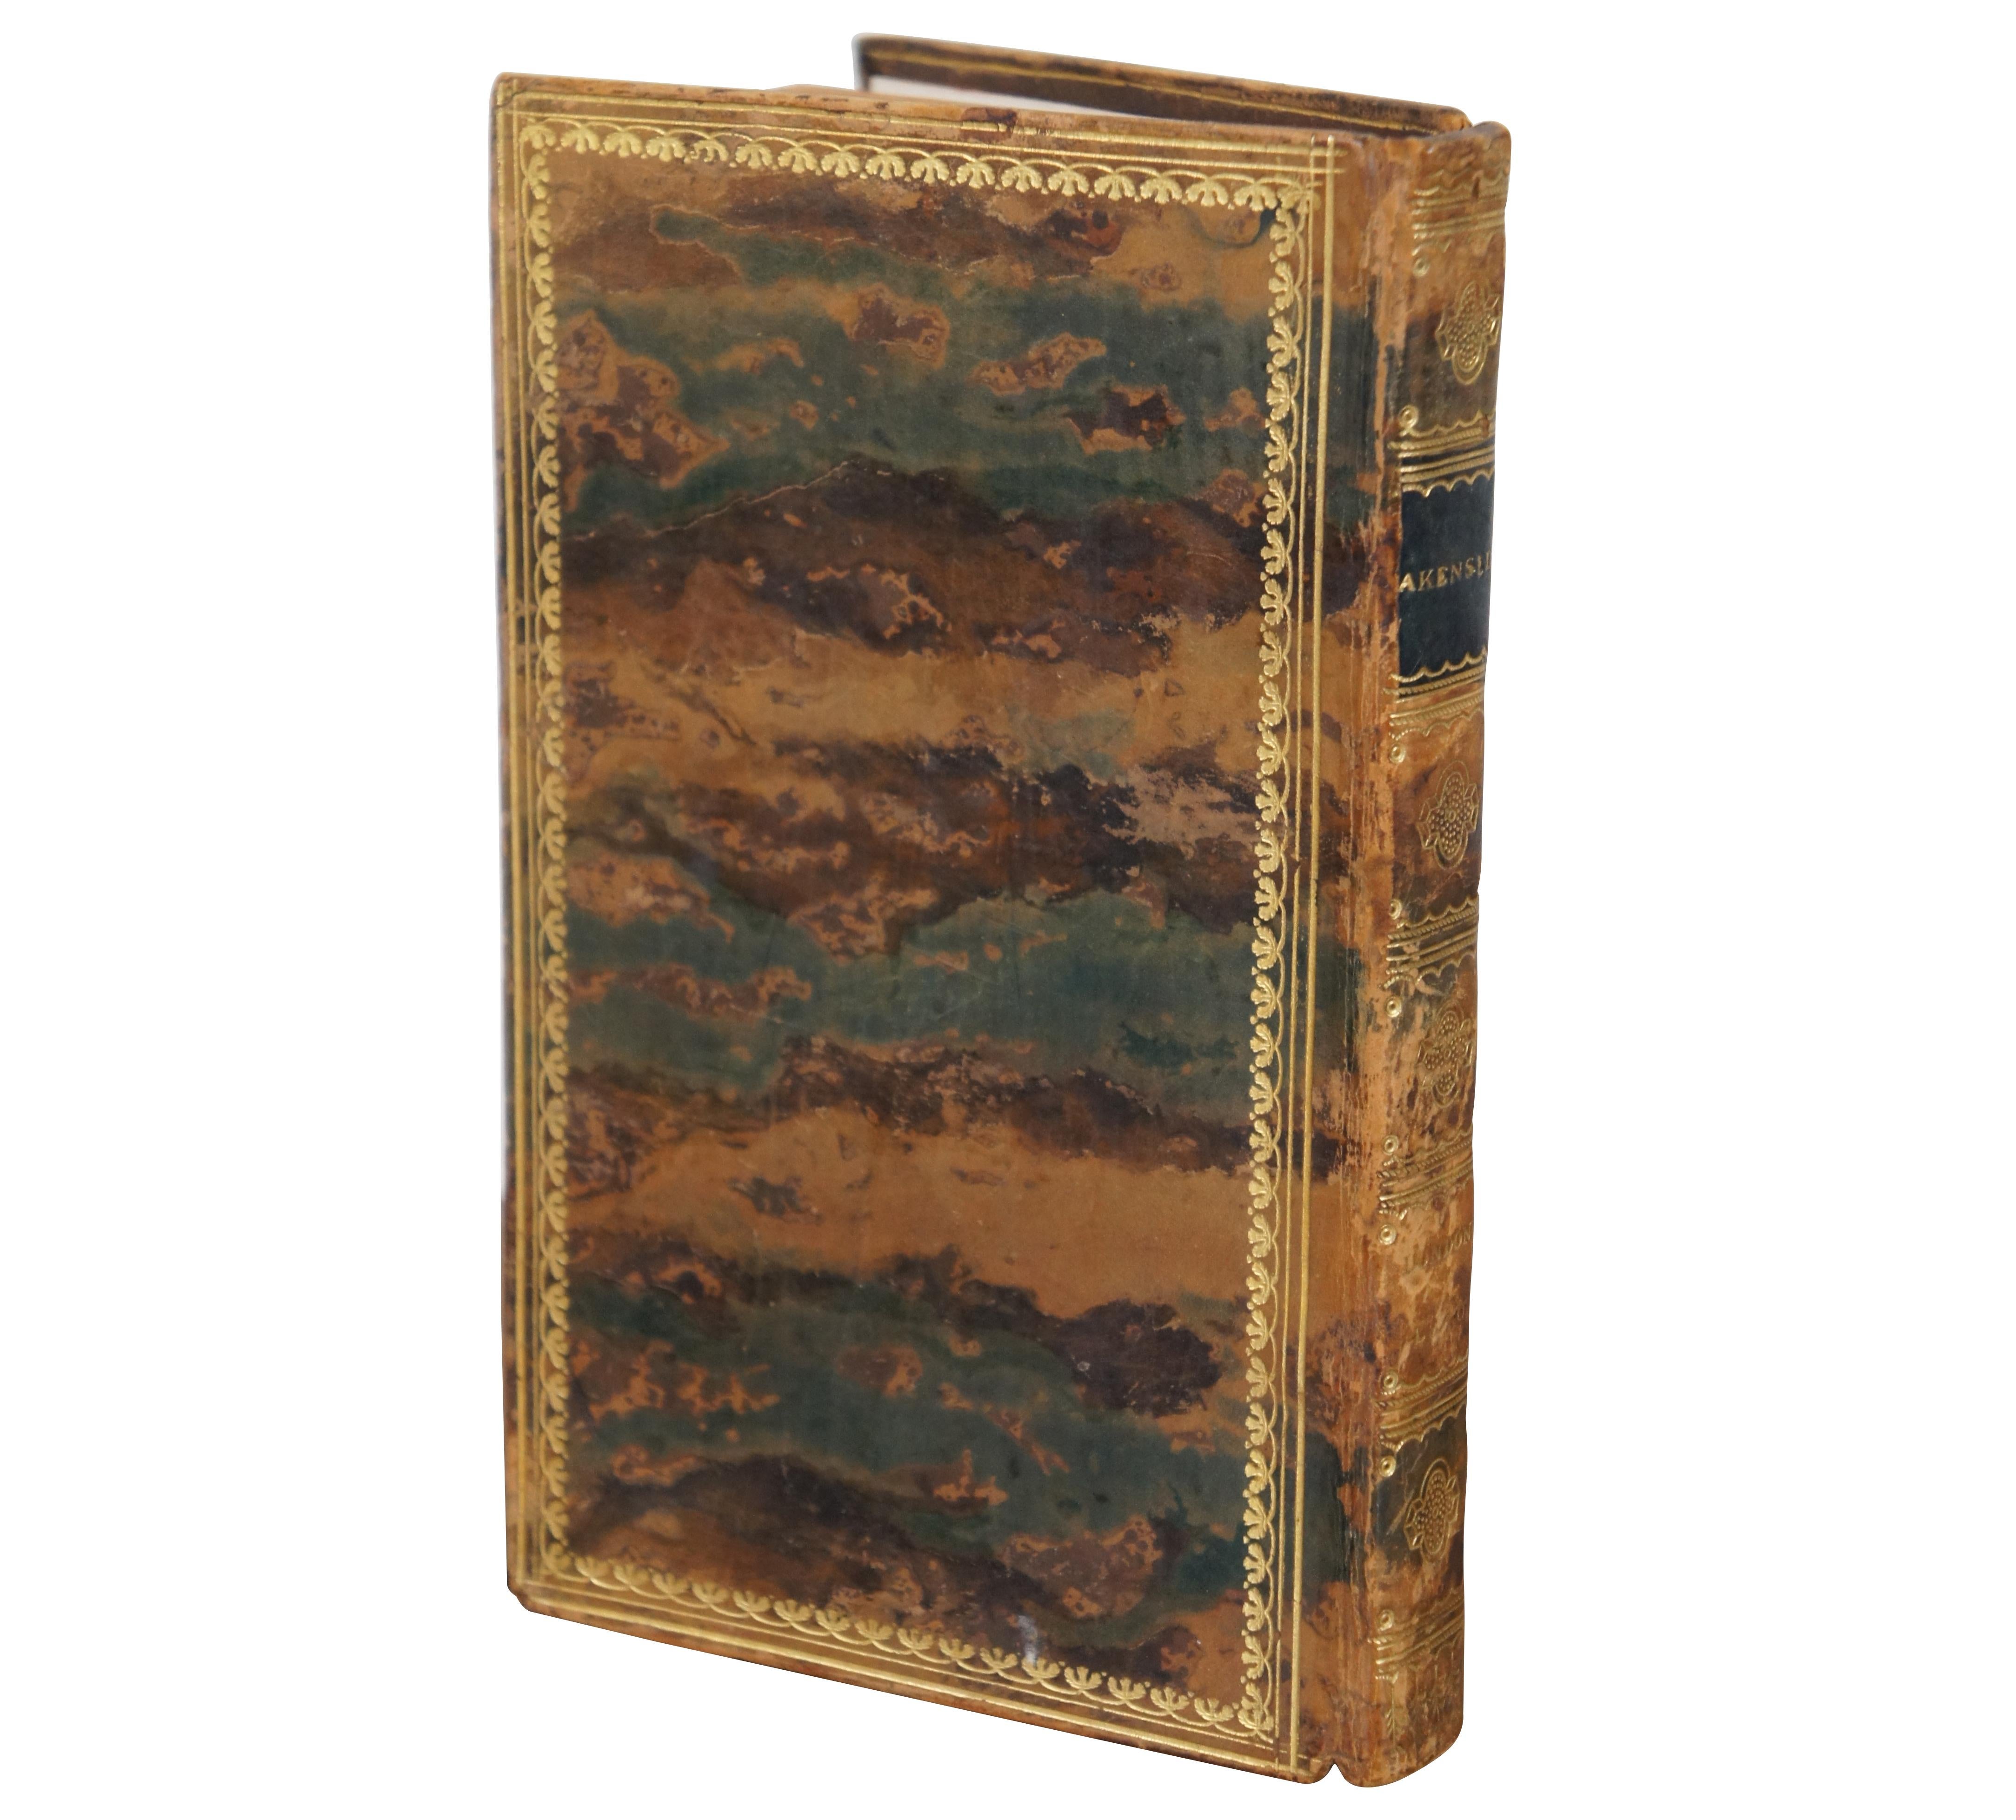 Antique Georgian era marbled leather hard cover book titled “The Pleasures of Imagination” by Mark Akenside, M.D. - A New Edition to Which is Prefixed a Critical Essay on the Poem by Mrs. Anna Barbauld – printed in London for T. Cadell and W.